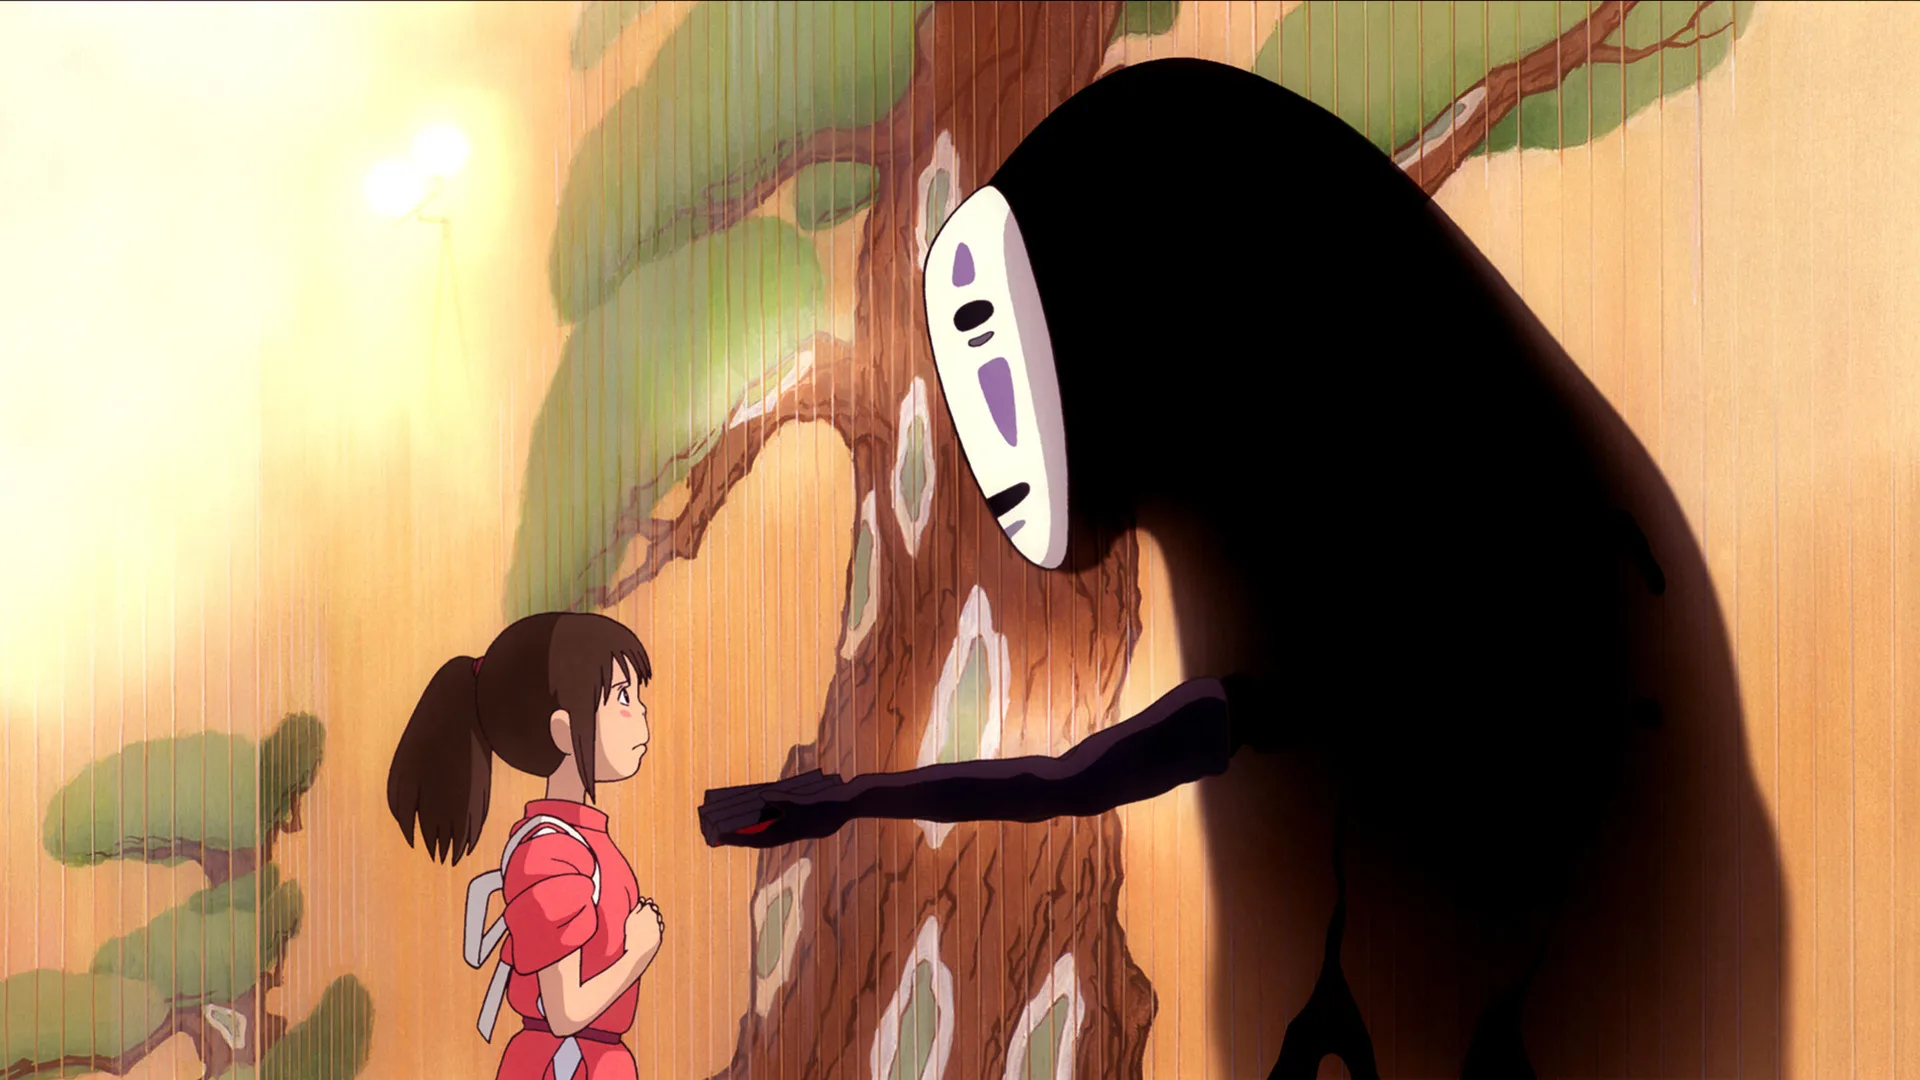 A still from the animated film Spirited Away showing the character No Face giving something to Chihiro against a bath house background